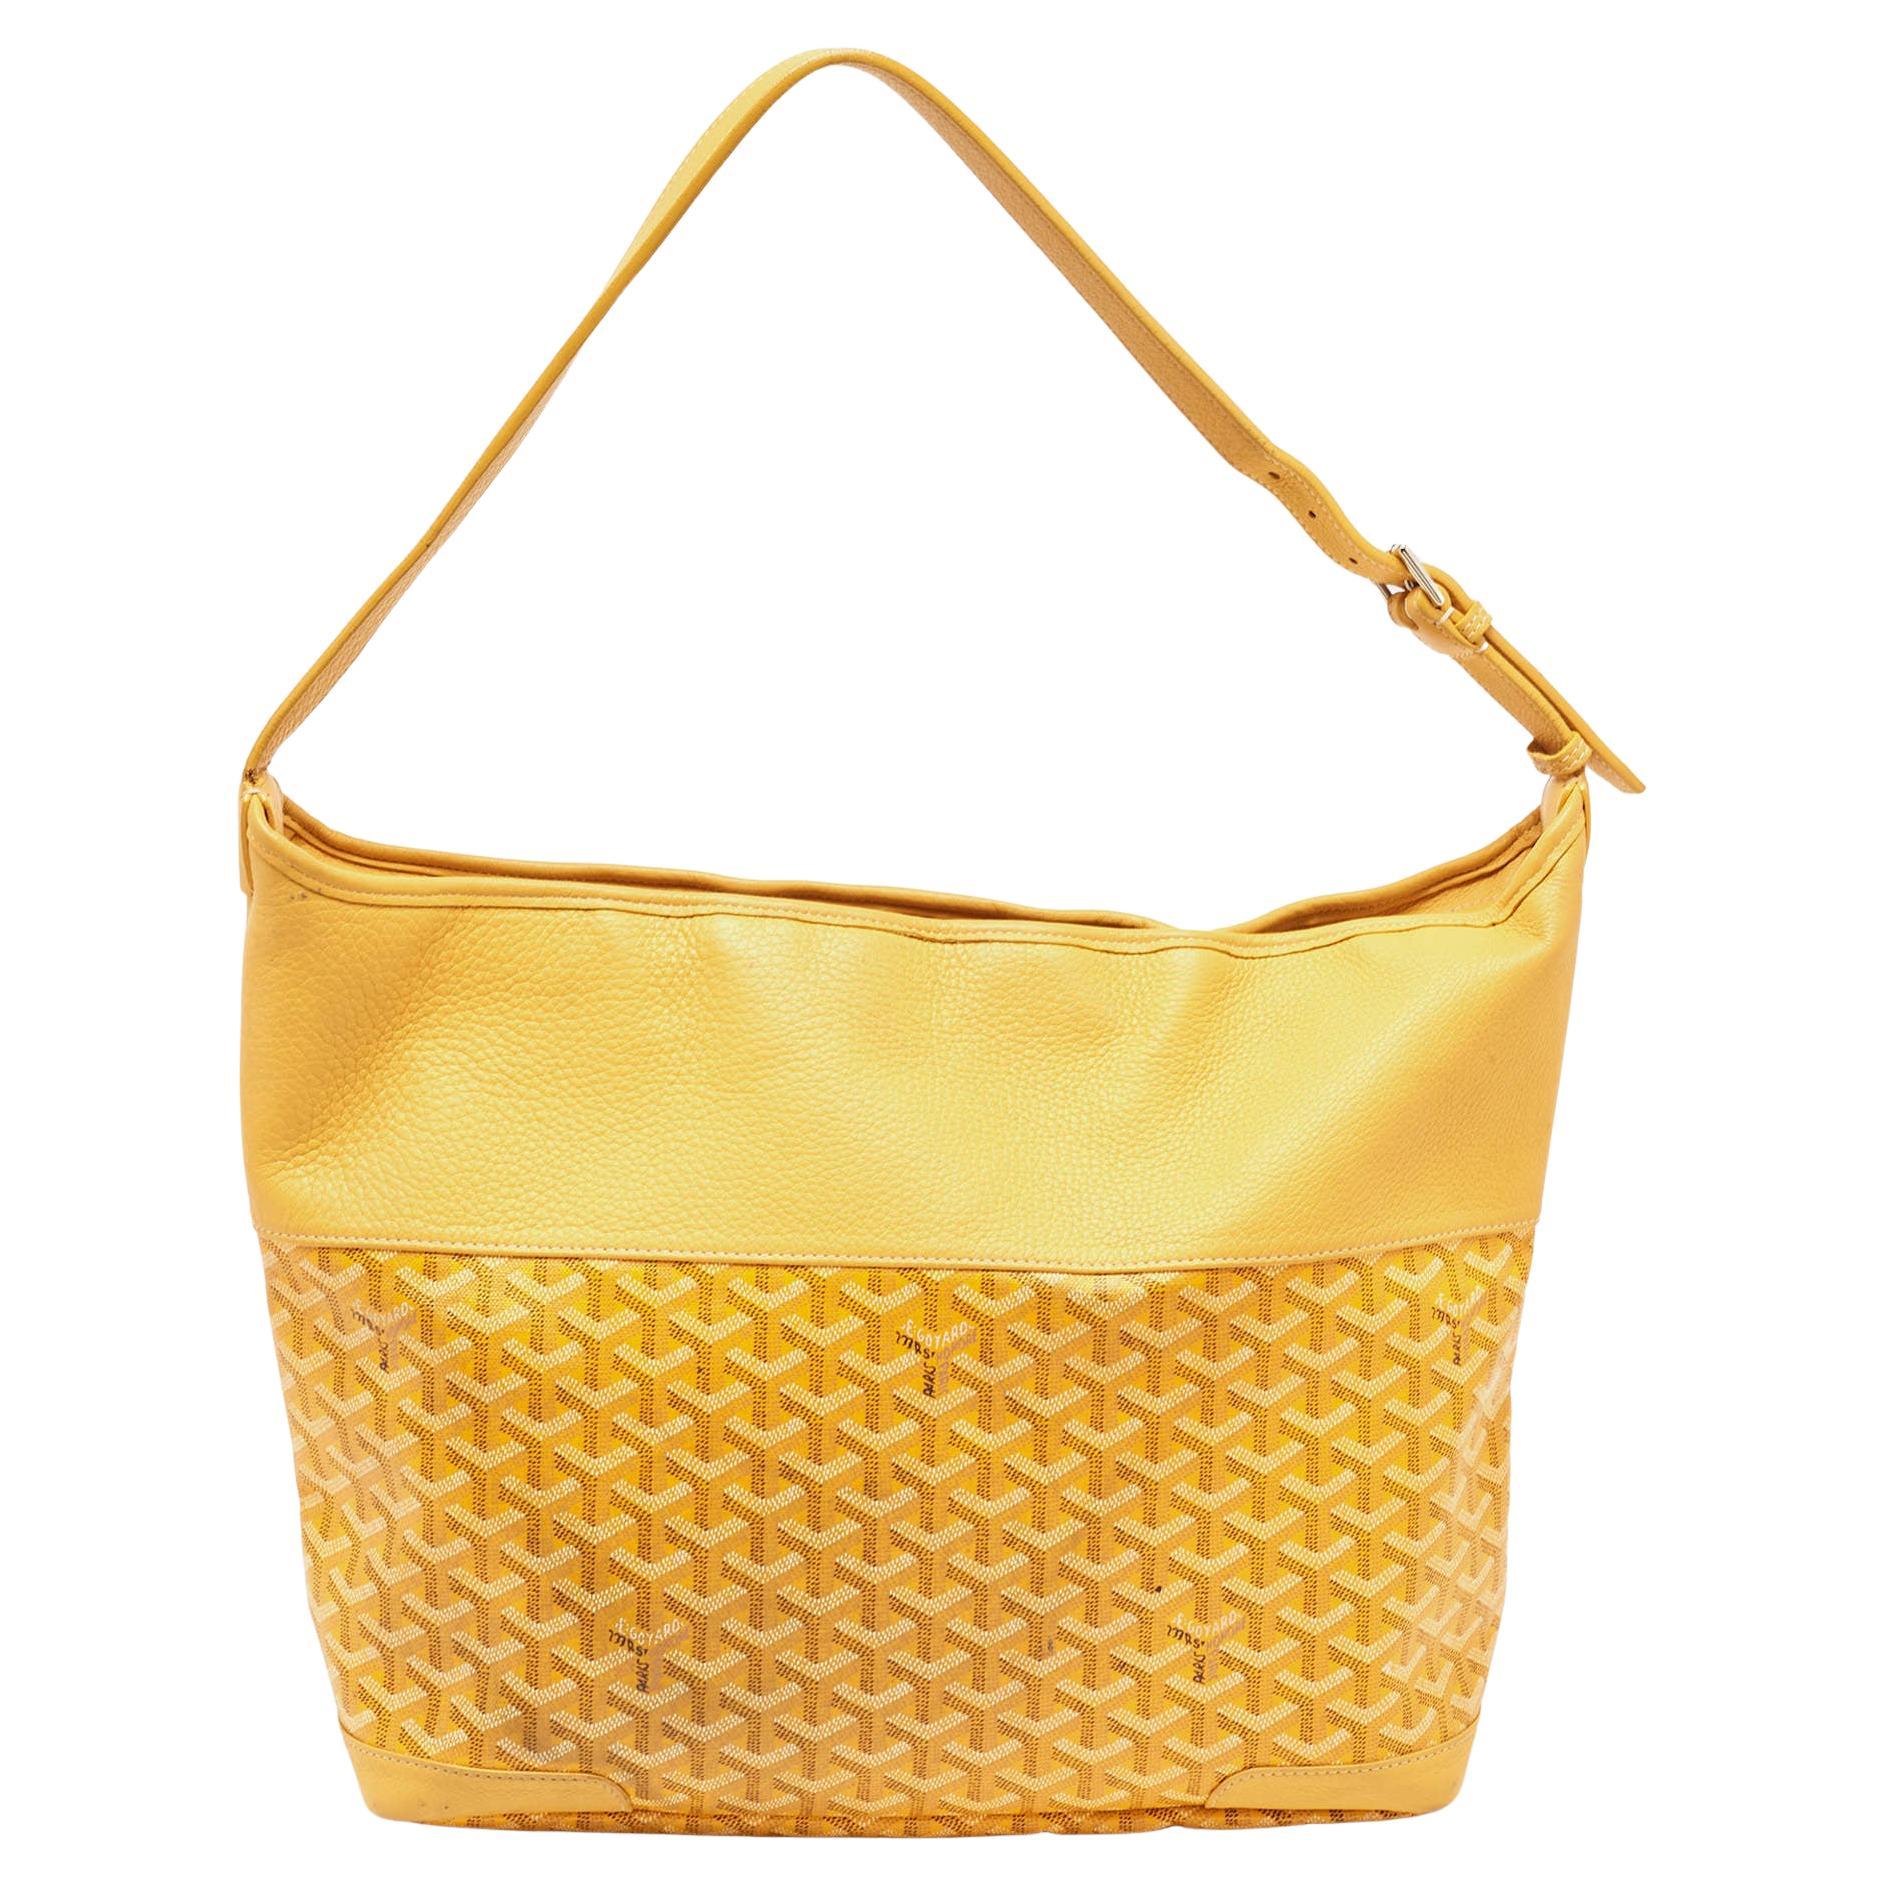 This handbag from Goyard will make the dream of countless women come true. Crafted from coated canvas and leather, this bag has a luscious yellow shade. While the shape and detailing elevate its beauty, the fabric interior will dutifully hold all